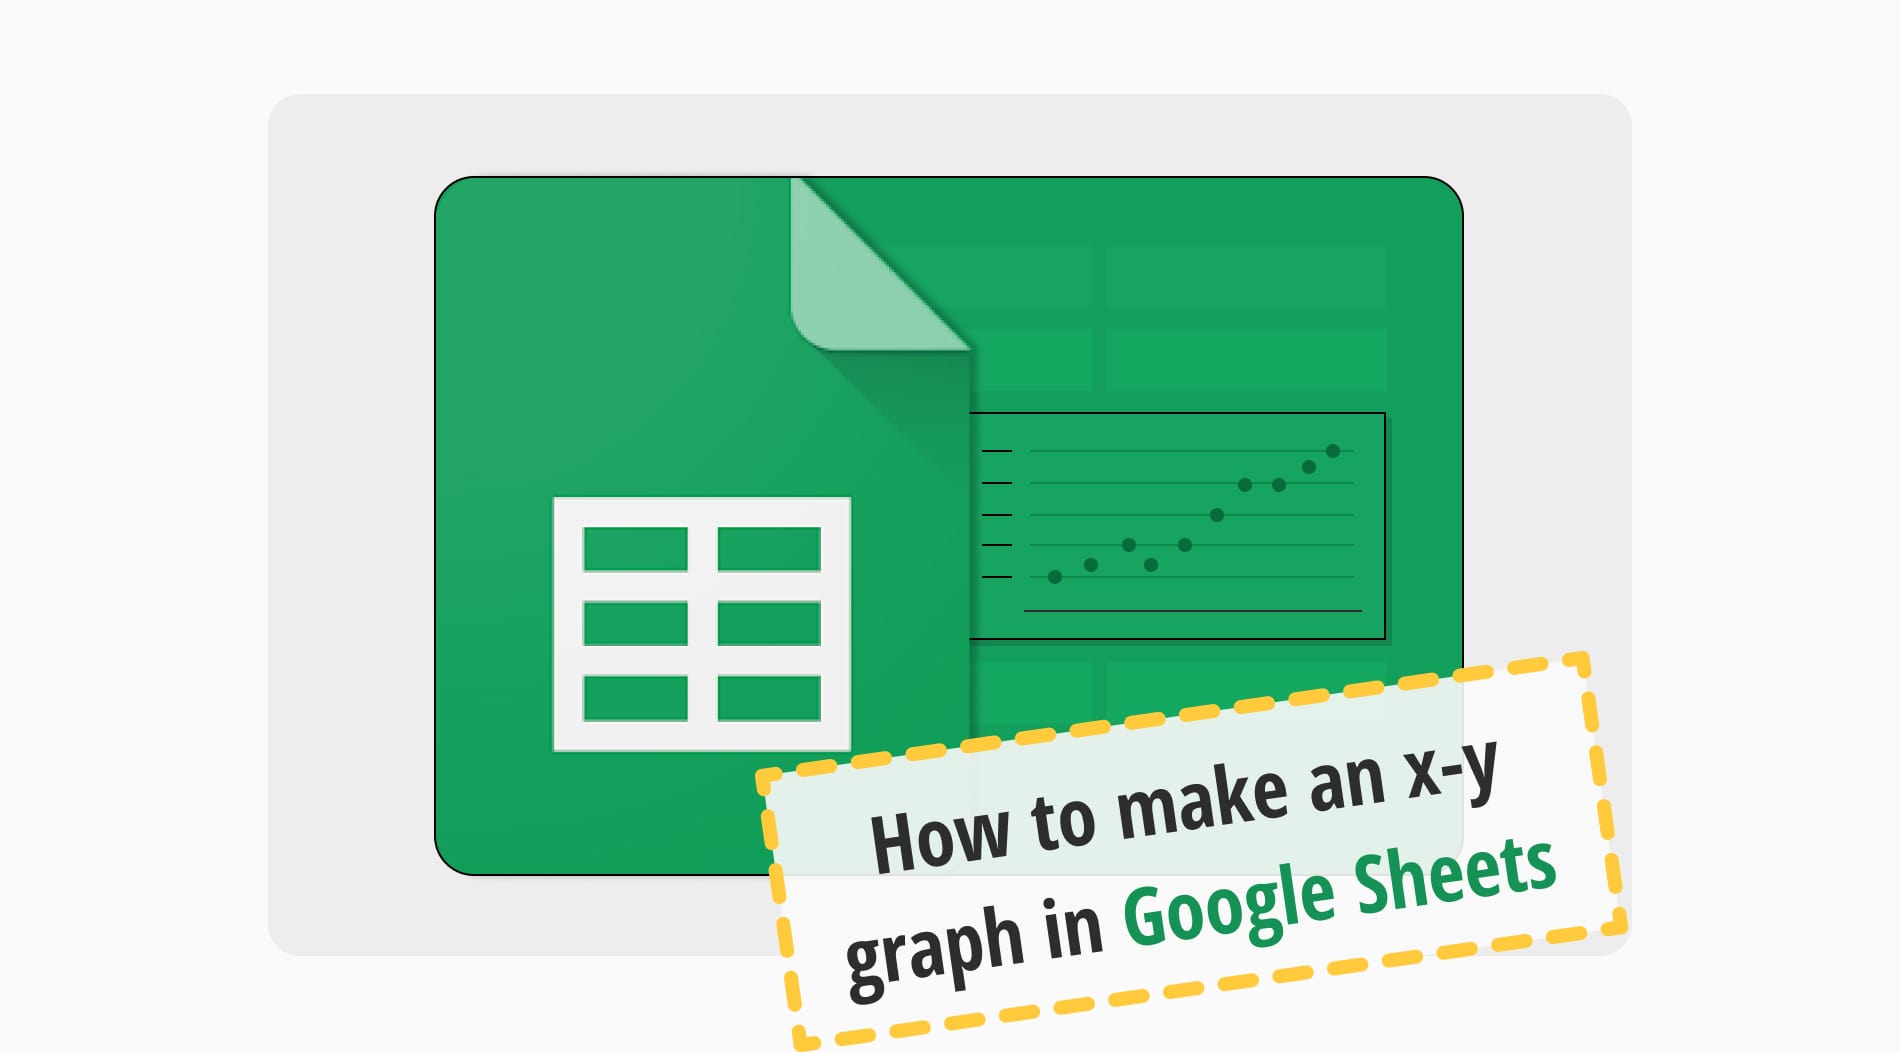 How to make an x-y graph in Google Sheets (Step by step)